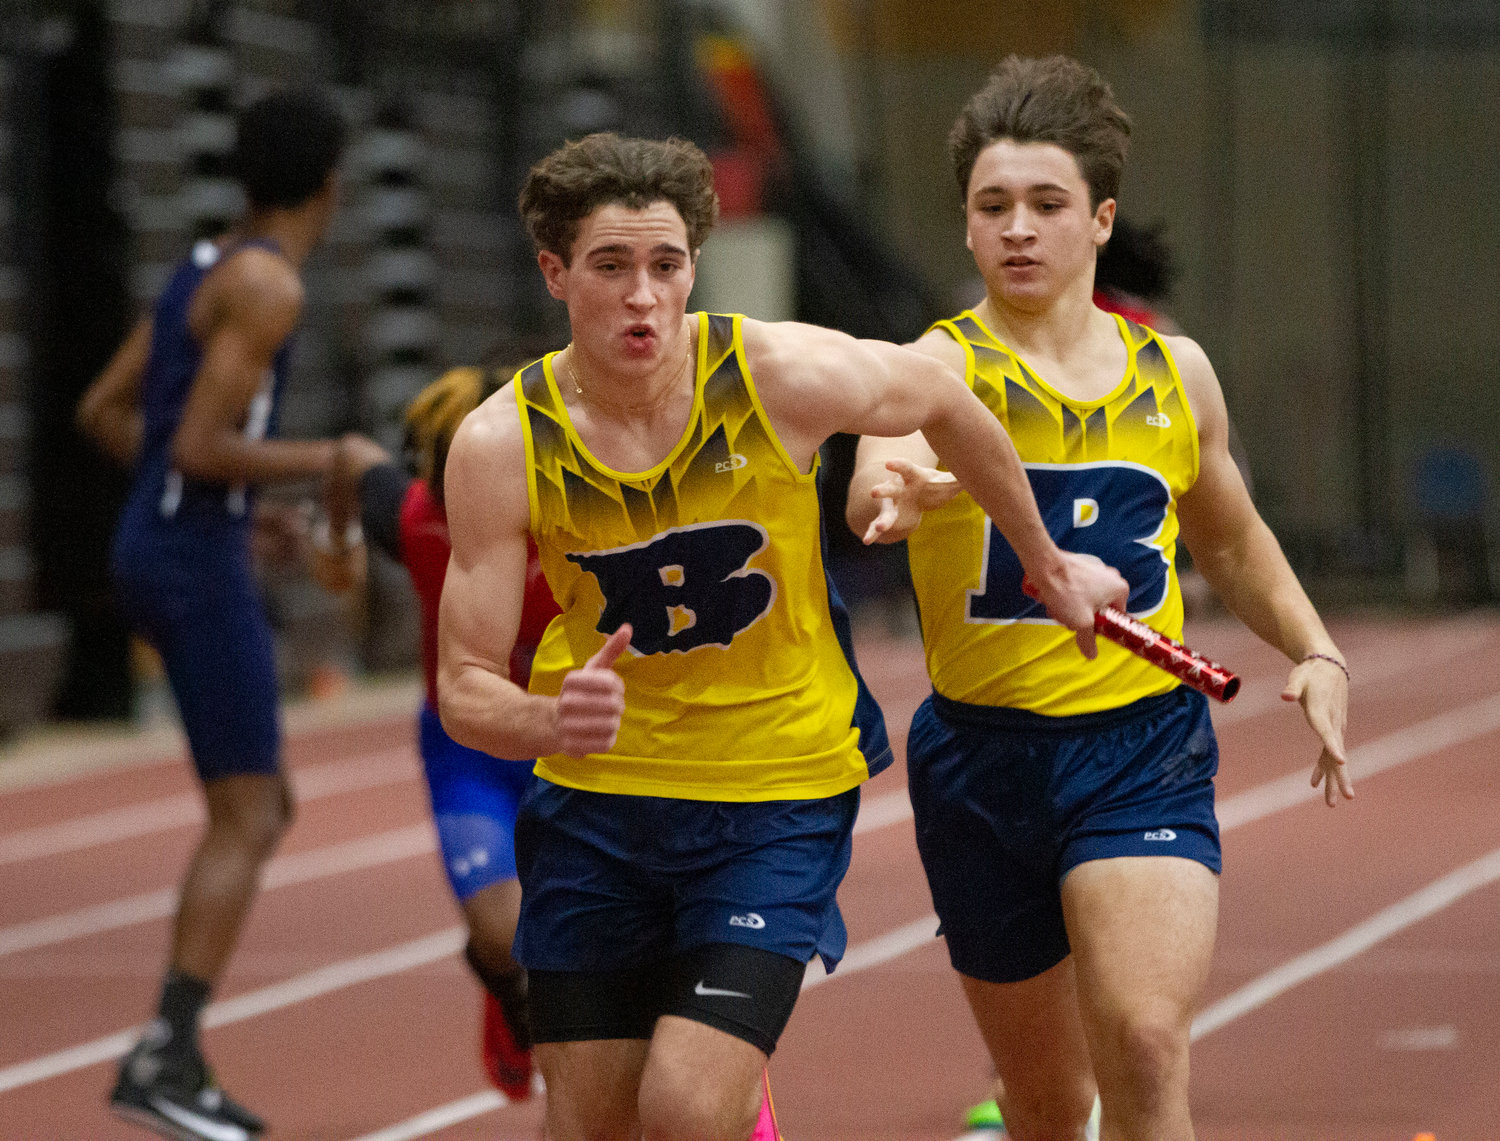 Ethan Knight (left), shown taking the baton during a relay event at a previous meet, set a new school record in the 55-meter hurdles during the Metropolitan Division Championships.